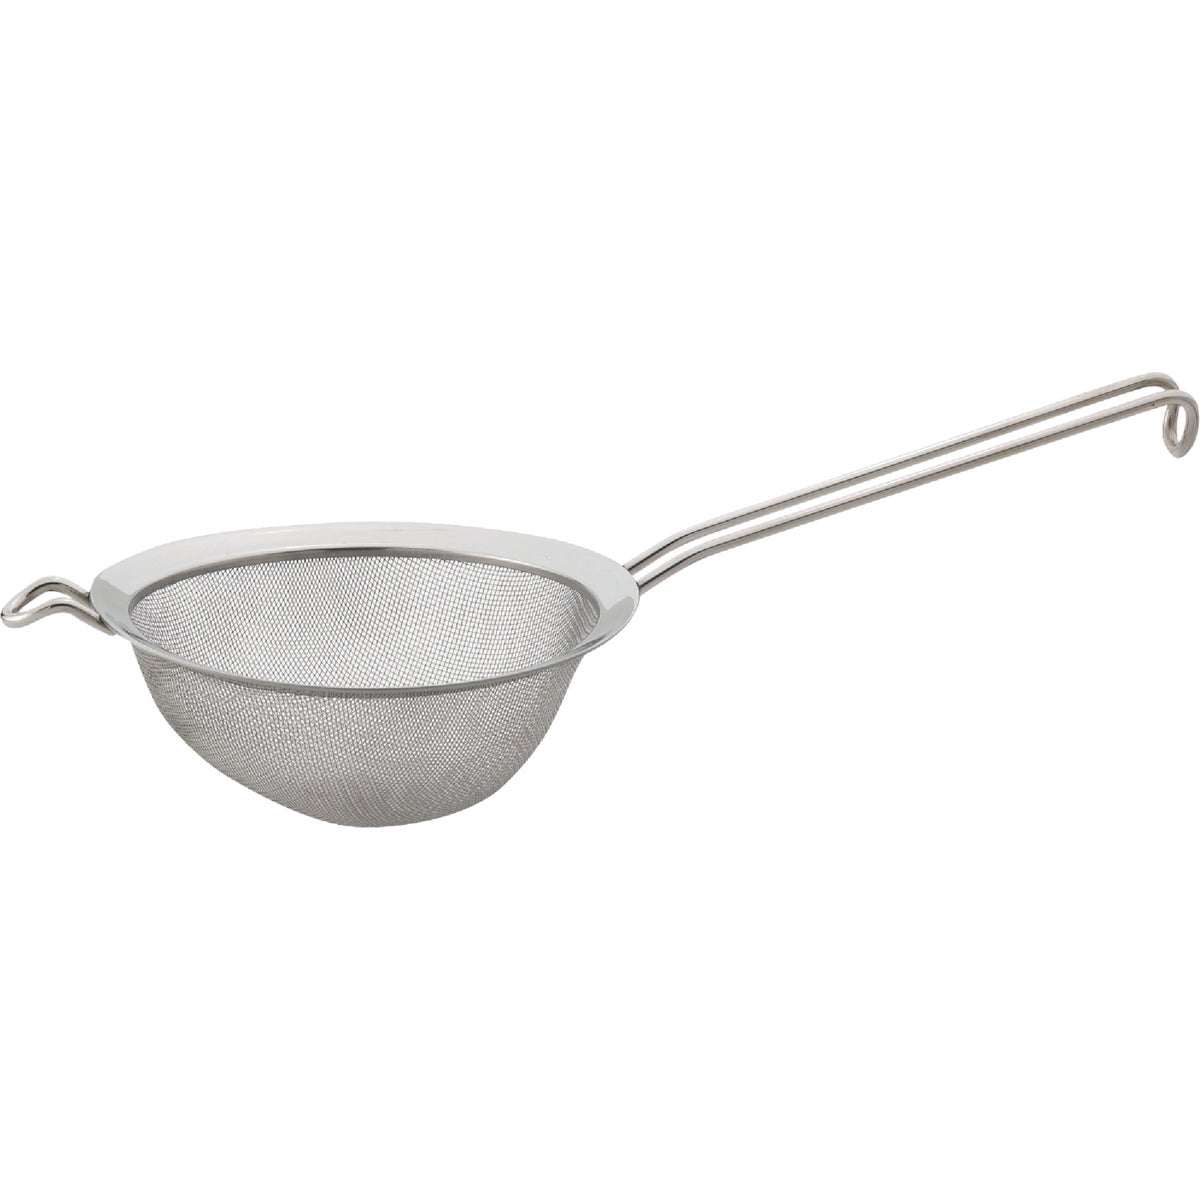 Item 618308, Double mesh strainer is at the core of a well-equipped kitchen.